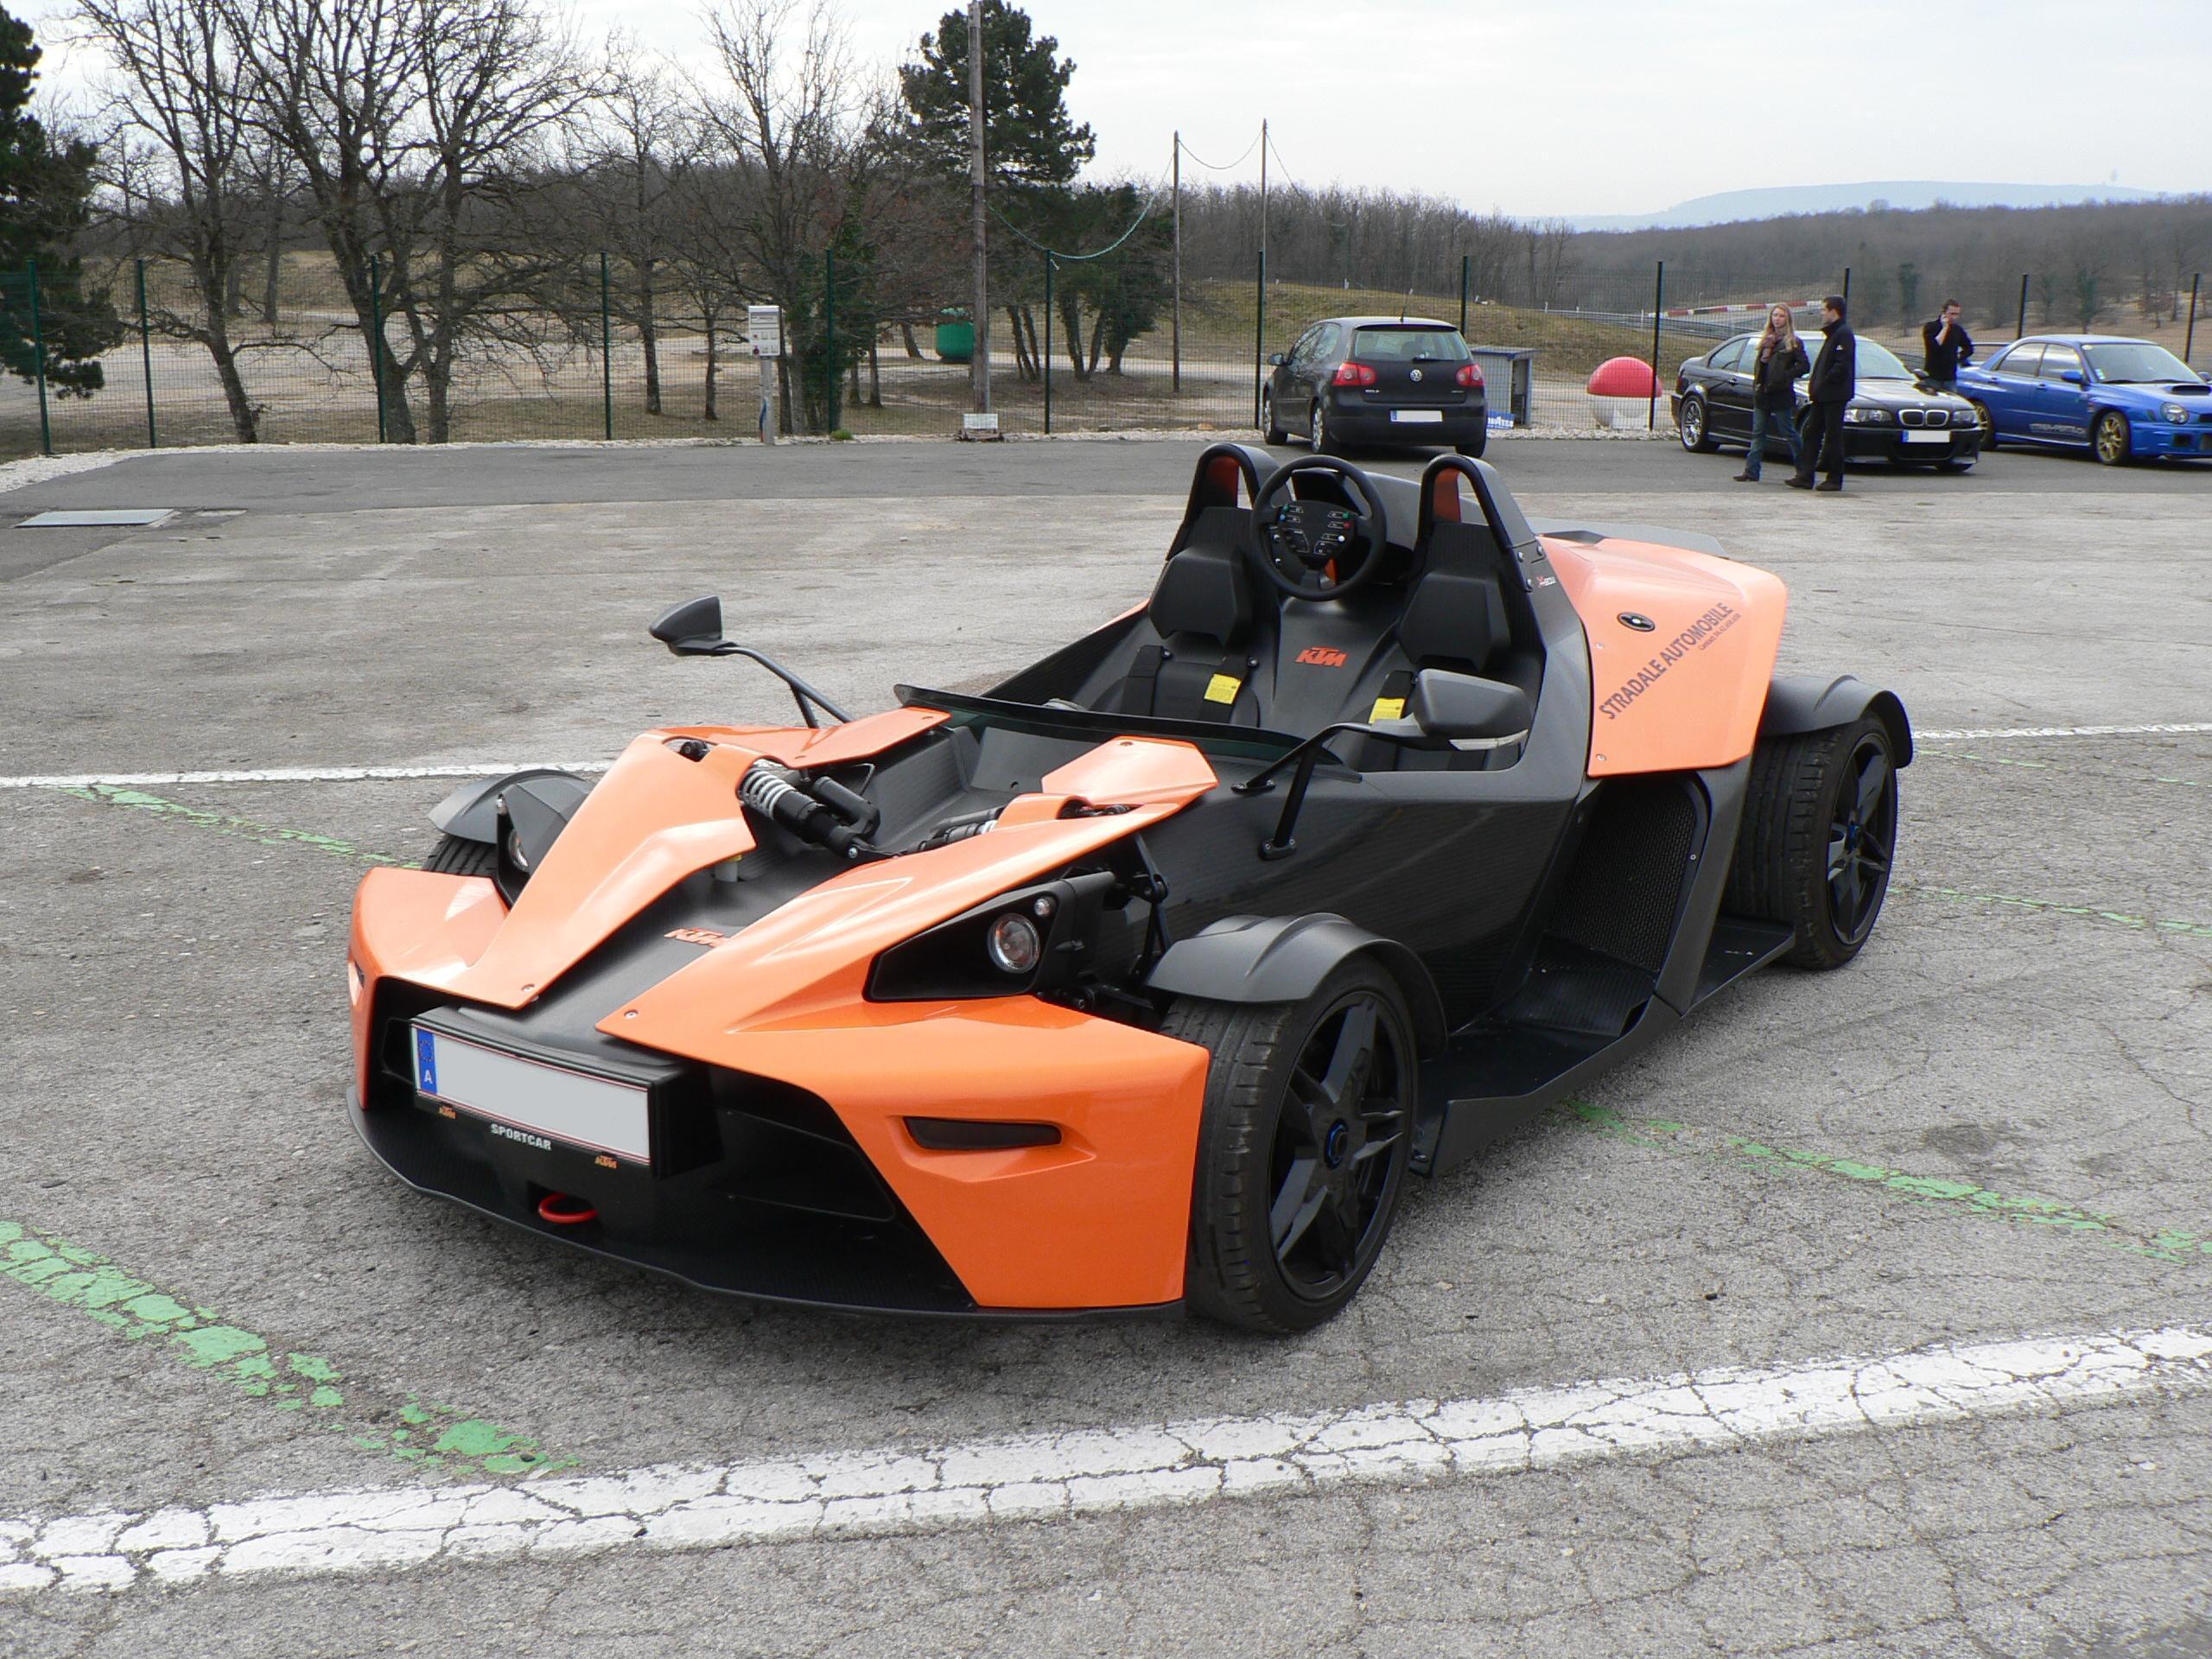 File:KTM X-Bow front.JPG - Wikimedia Commons